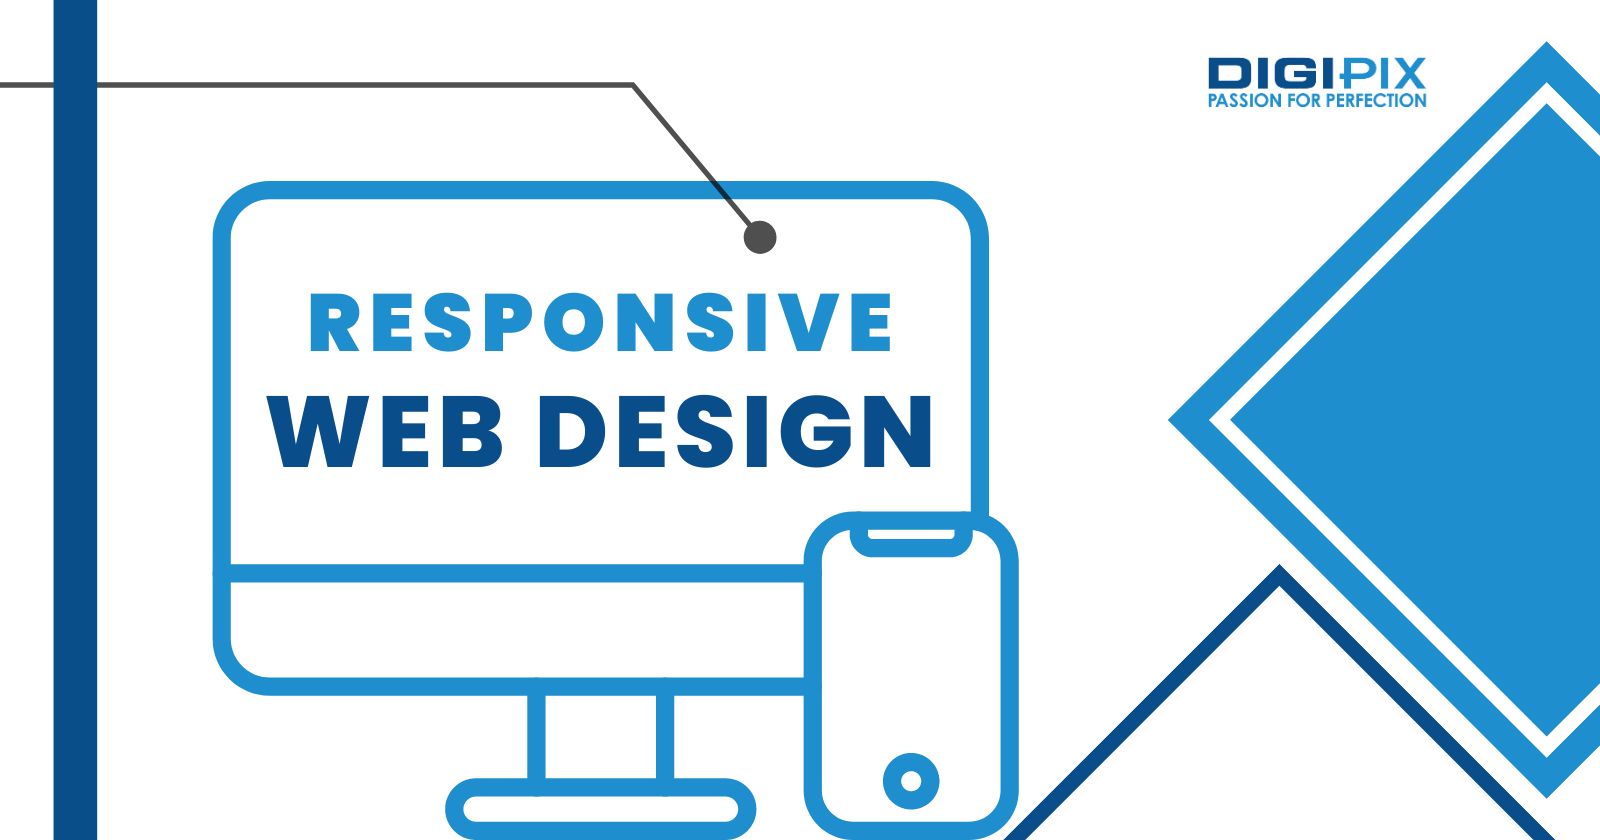 Responsive website design styling shows